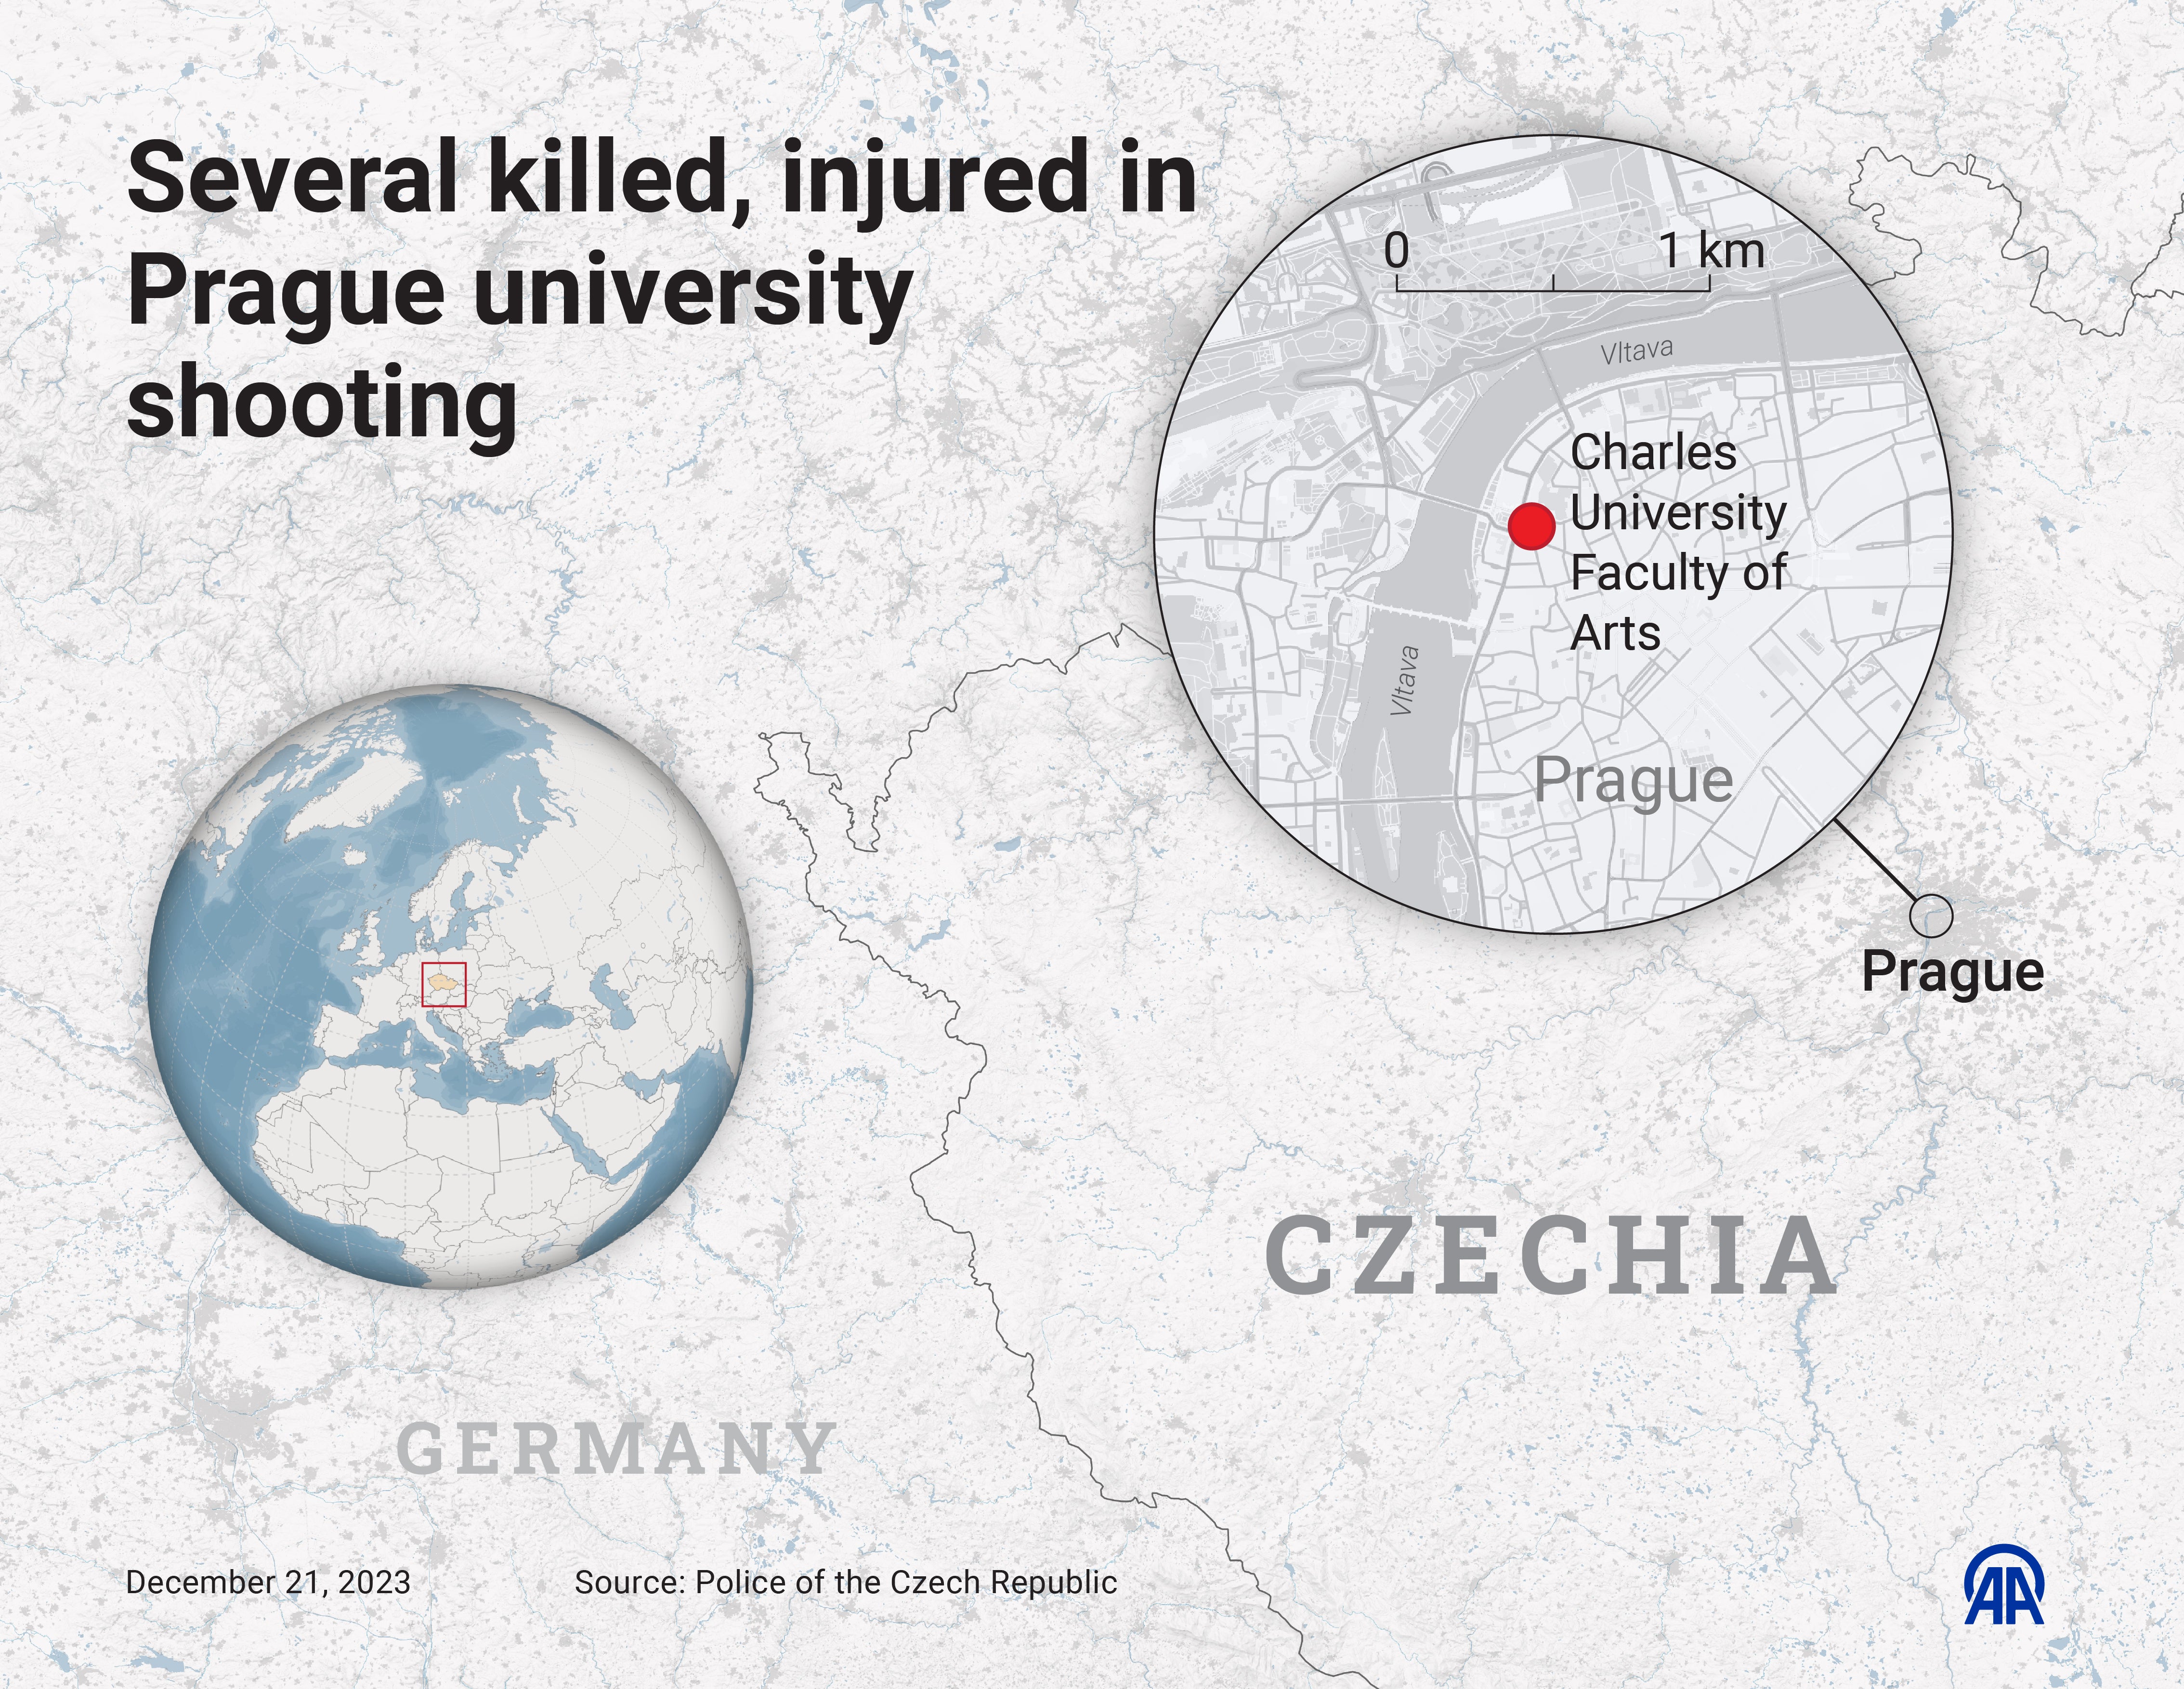 Map published showing the location of Charles University faculty of arts, where the gunman launched the attack